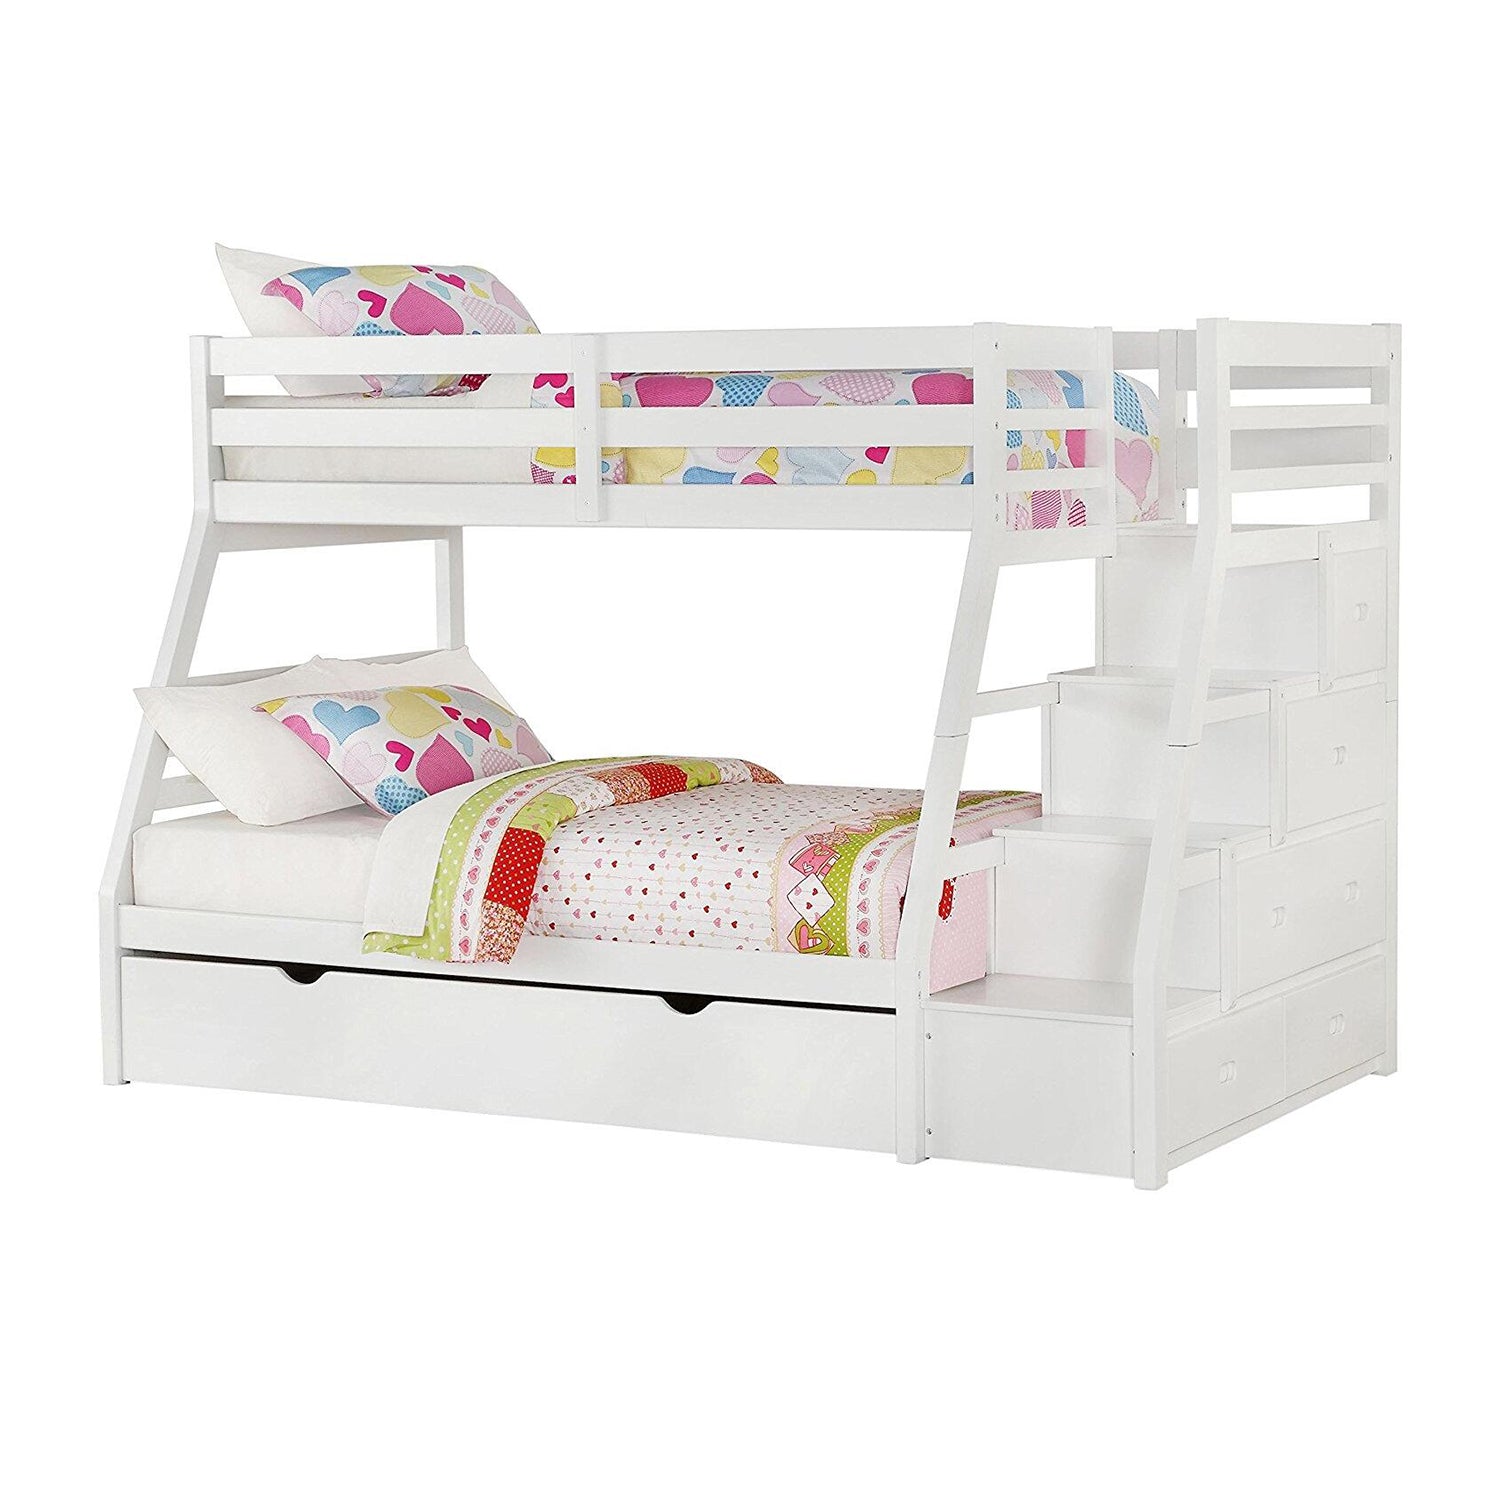 95" X 56" X 65" Twin Over Full White Storage Ladder And Trundle Bunk Bed Default Title